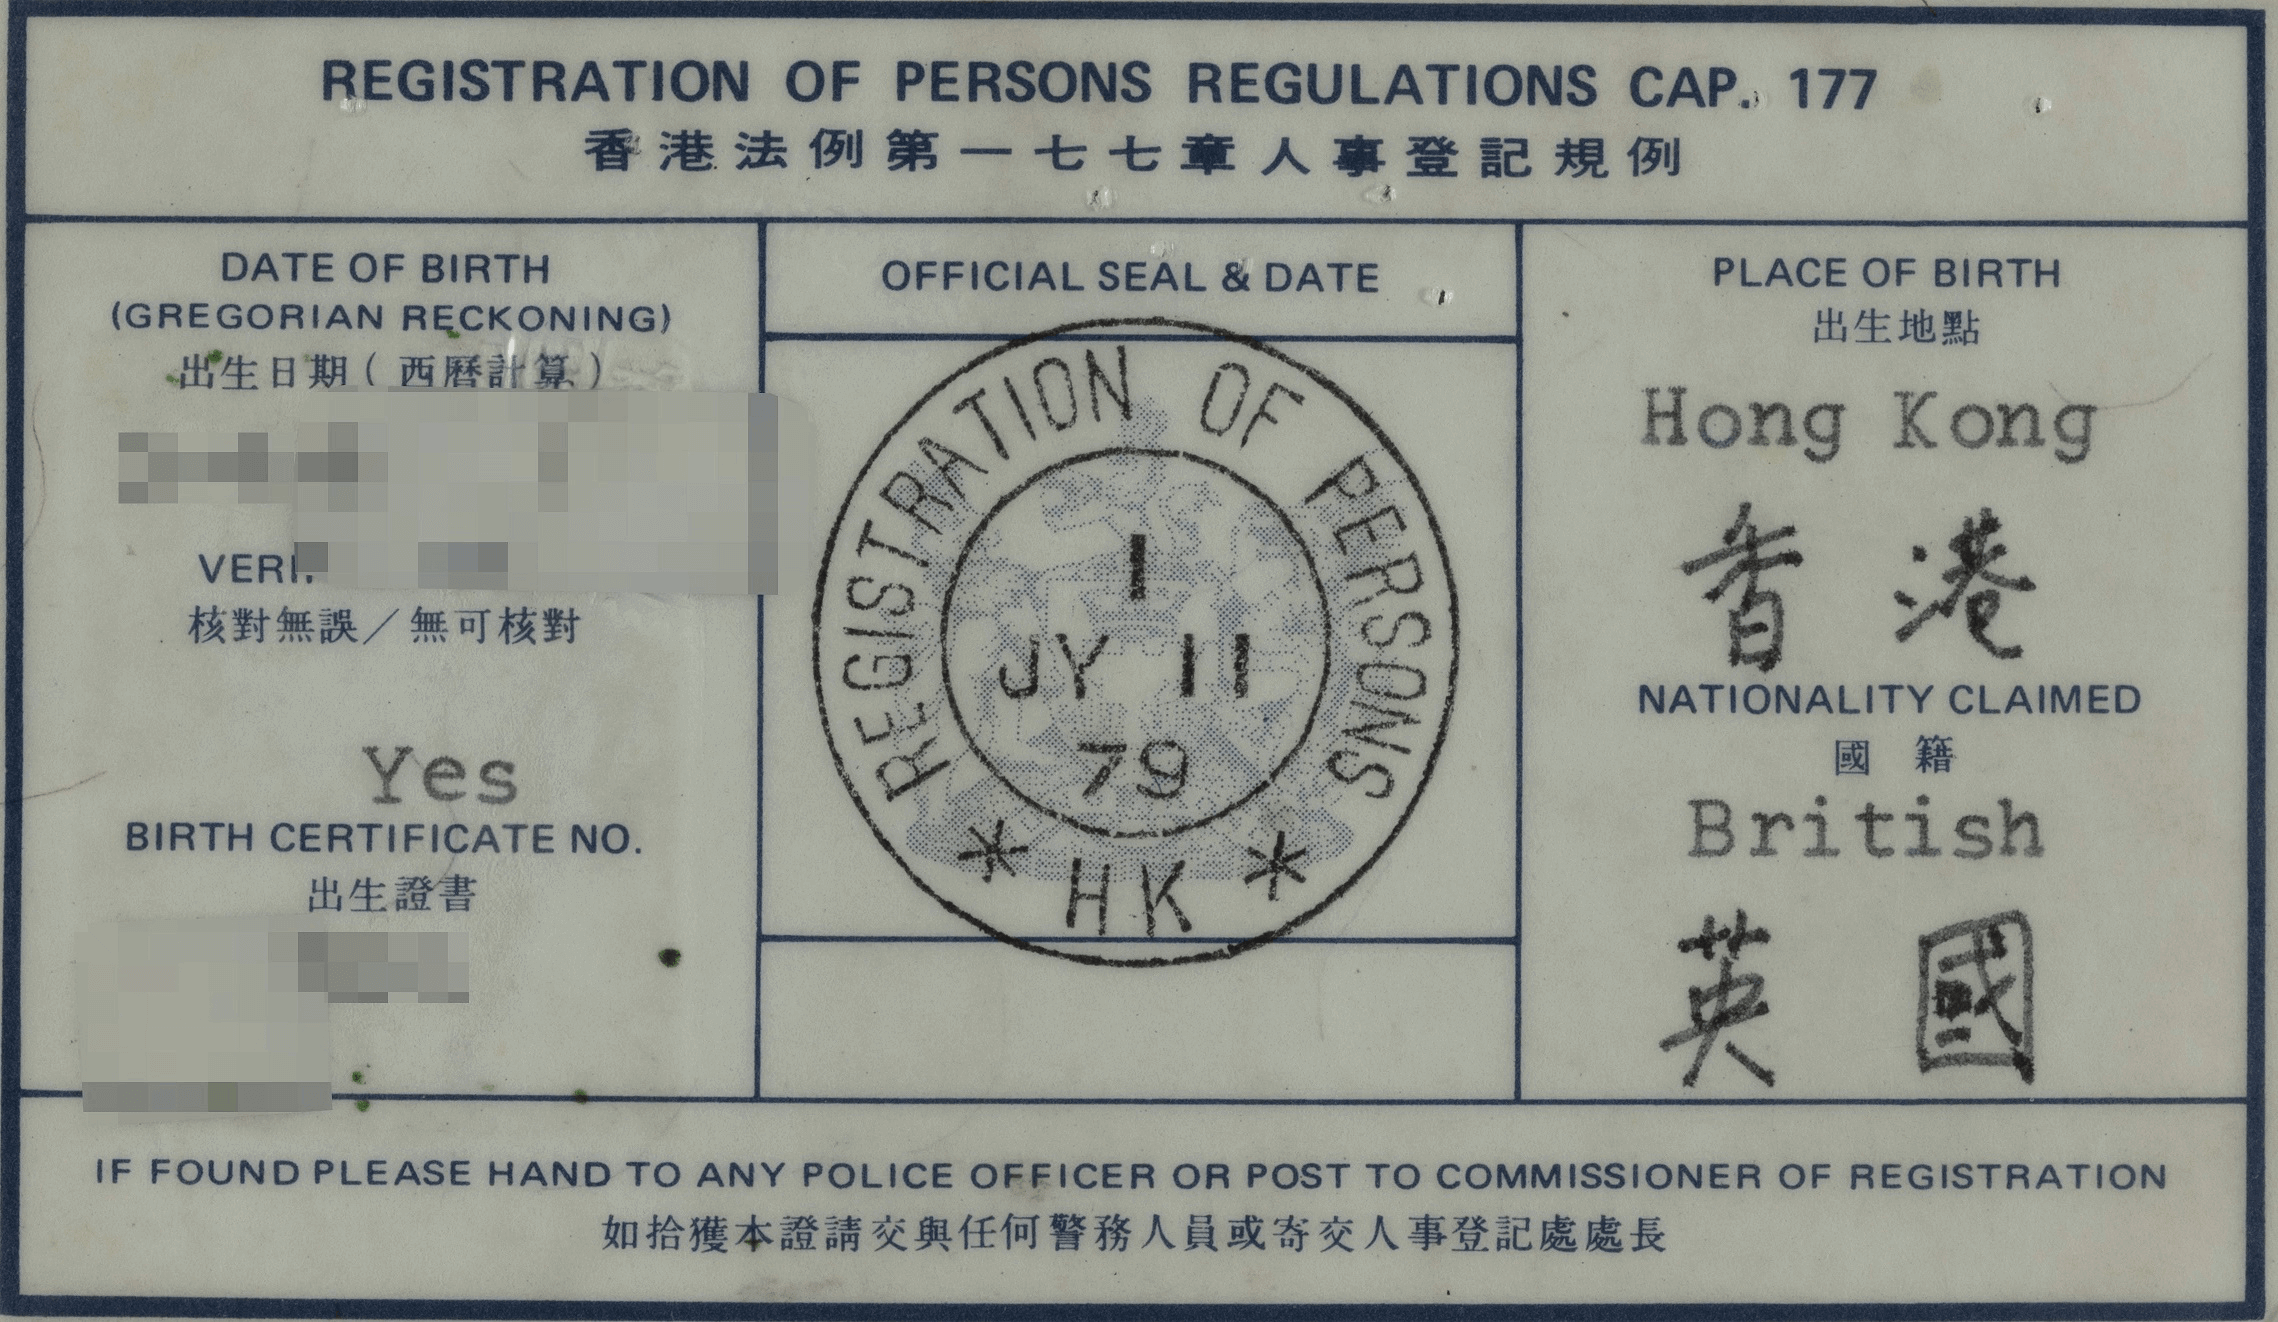 A new laminated juvenile ID card. (1979) Courtesy of the Immigration Department